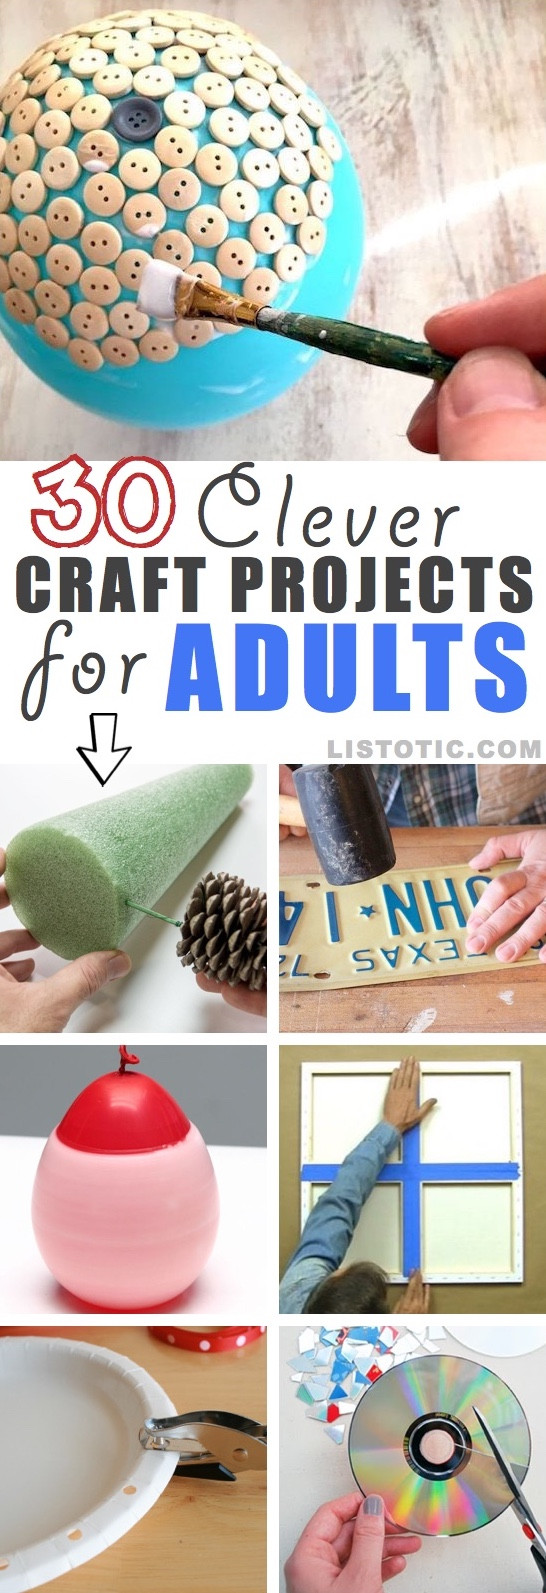 Easy Craft Projects For Adults
 Easy DIY Craft Ideas That Will Spark Your Creativity for